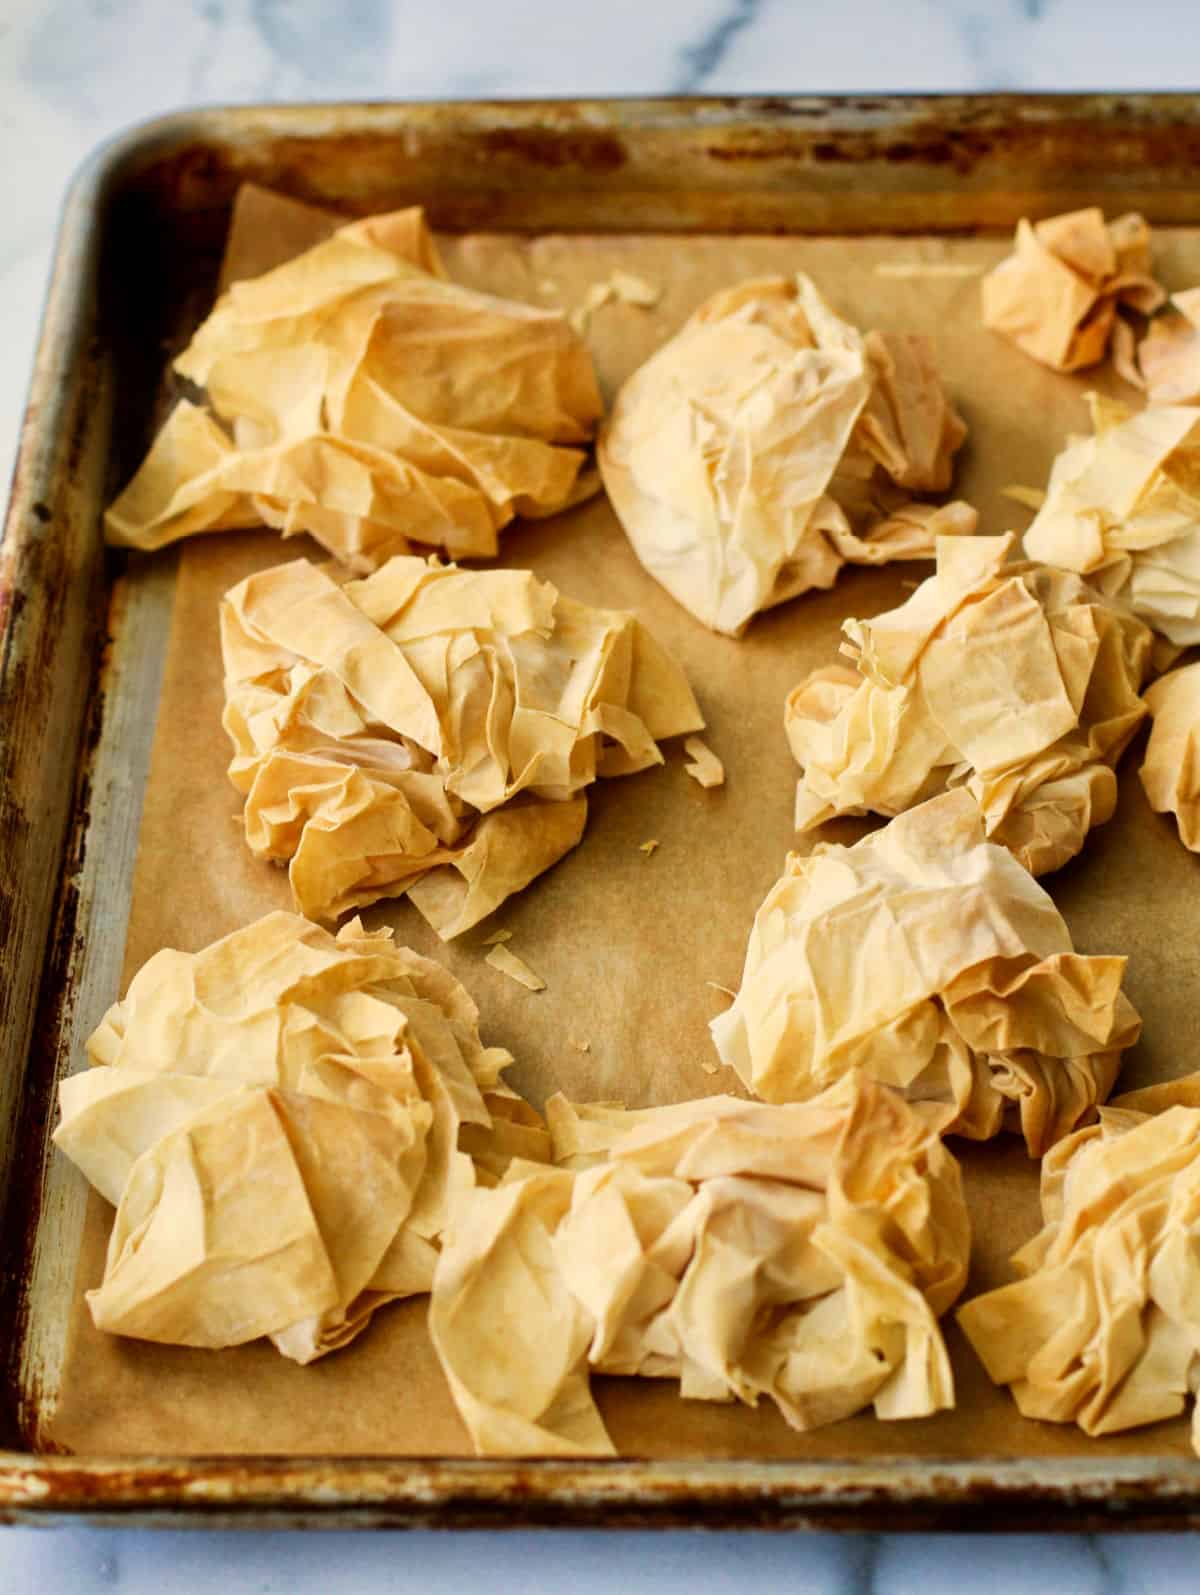 Phyllo sheets, baked.